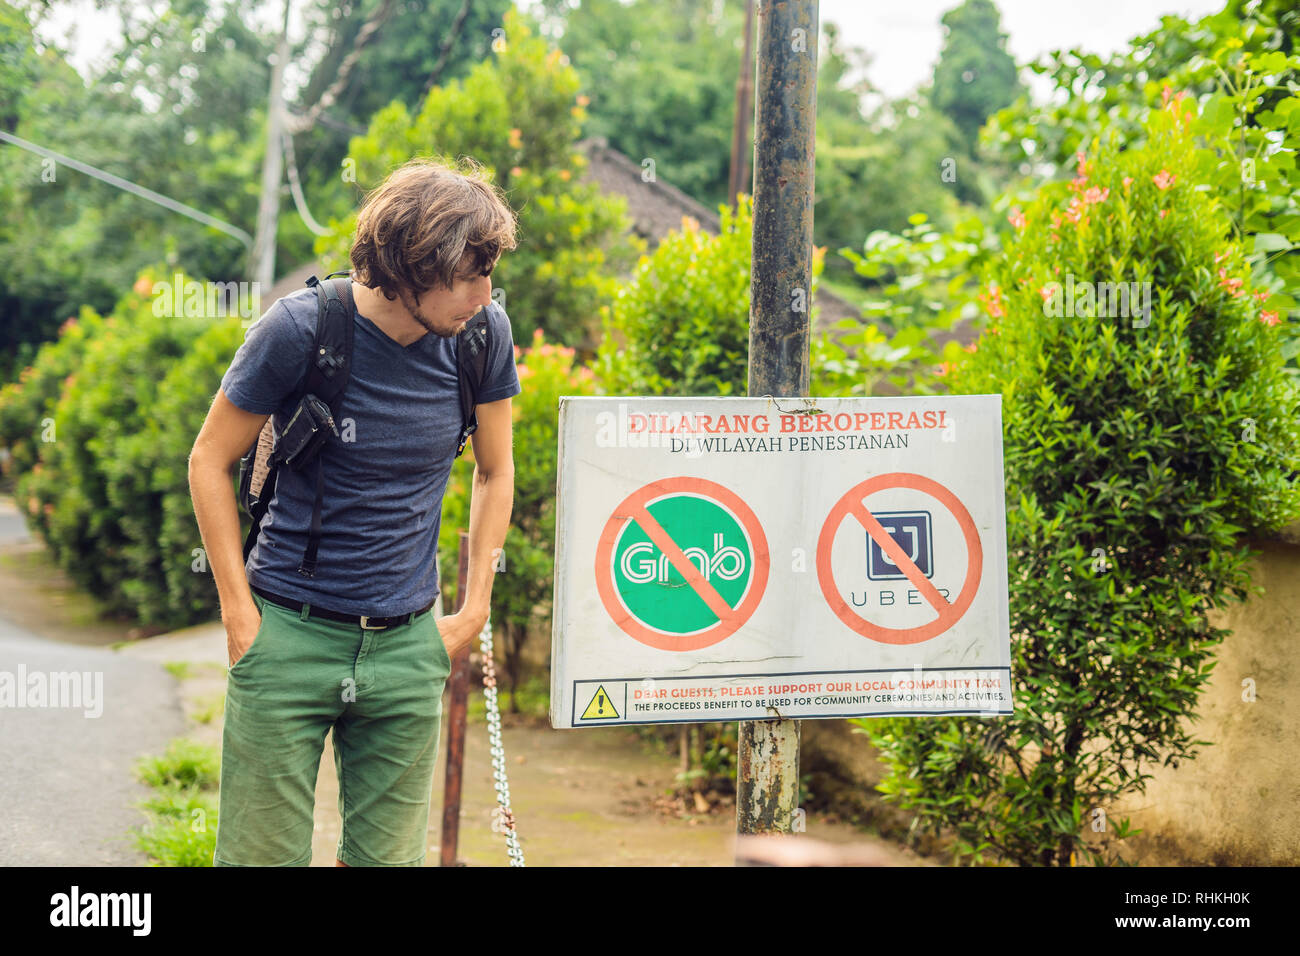 BALI, INDONESIA - 21 May, 2018: Young man looks at protest sign on a wall  in Indonesian objecting to Uber and Grab taxi drivers reads 'Uber and Grab  Stock Photo - Alamy